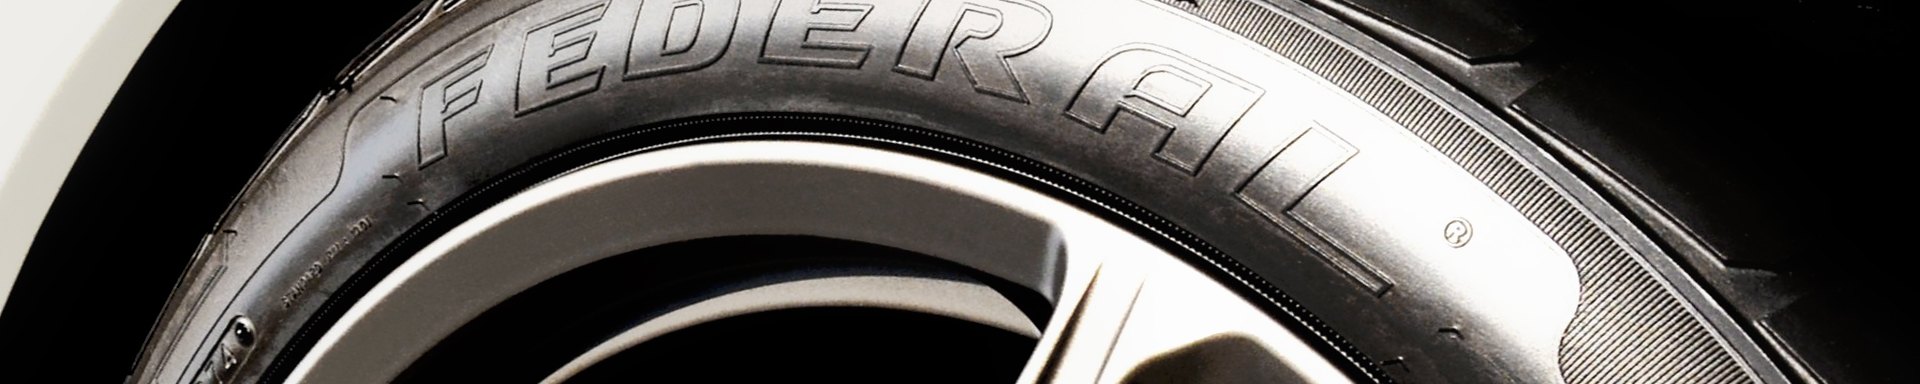 Universal FEDERAL TIRES